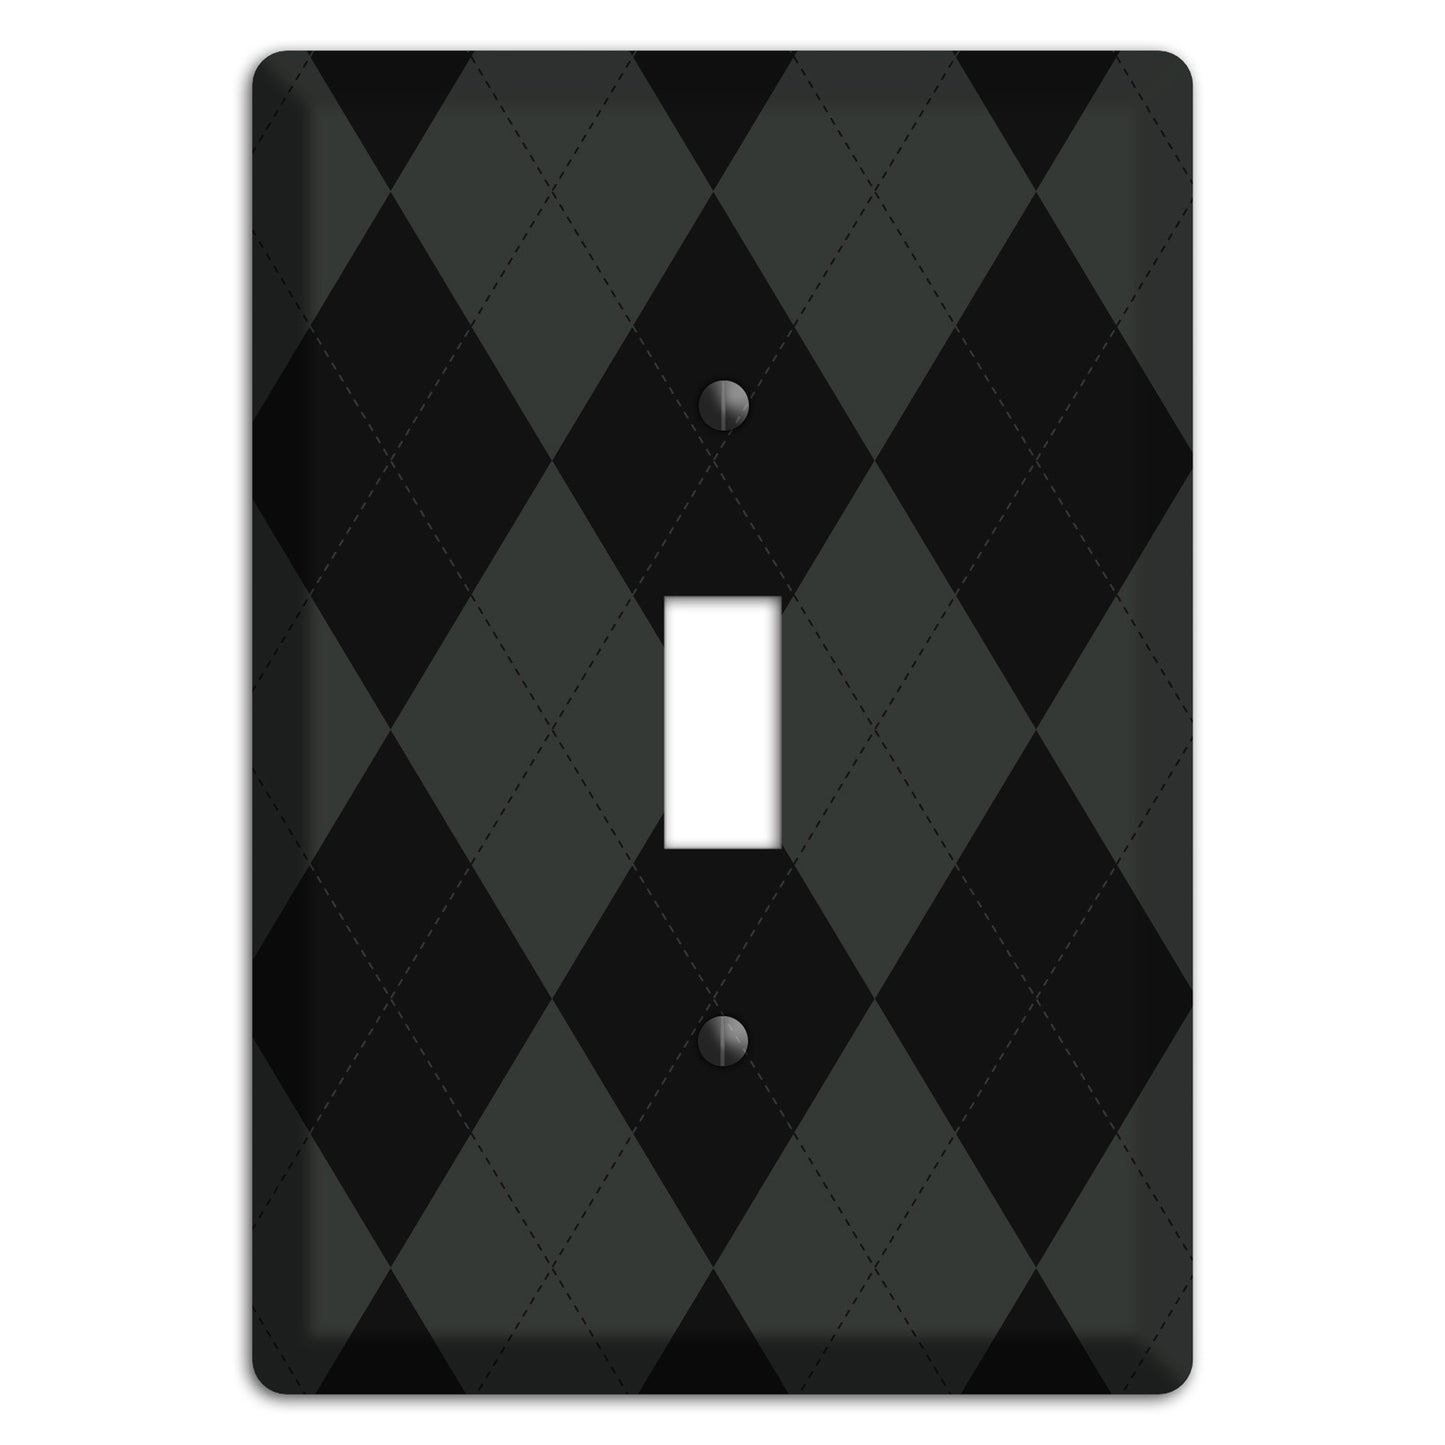 Gray and Black Argyle Cover Plates